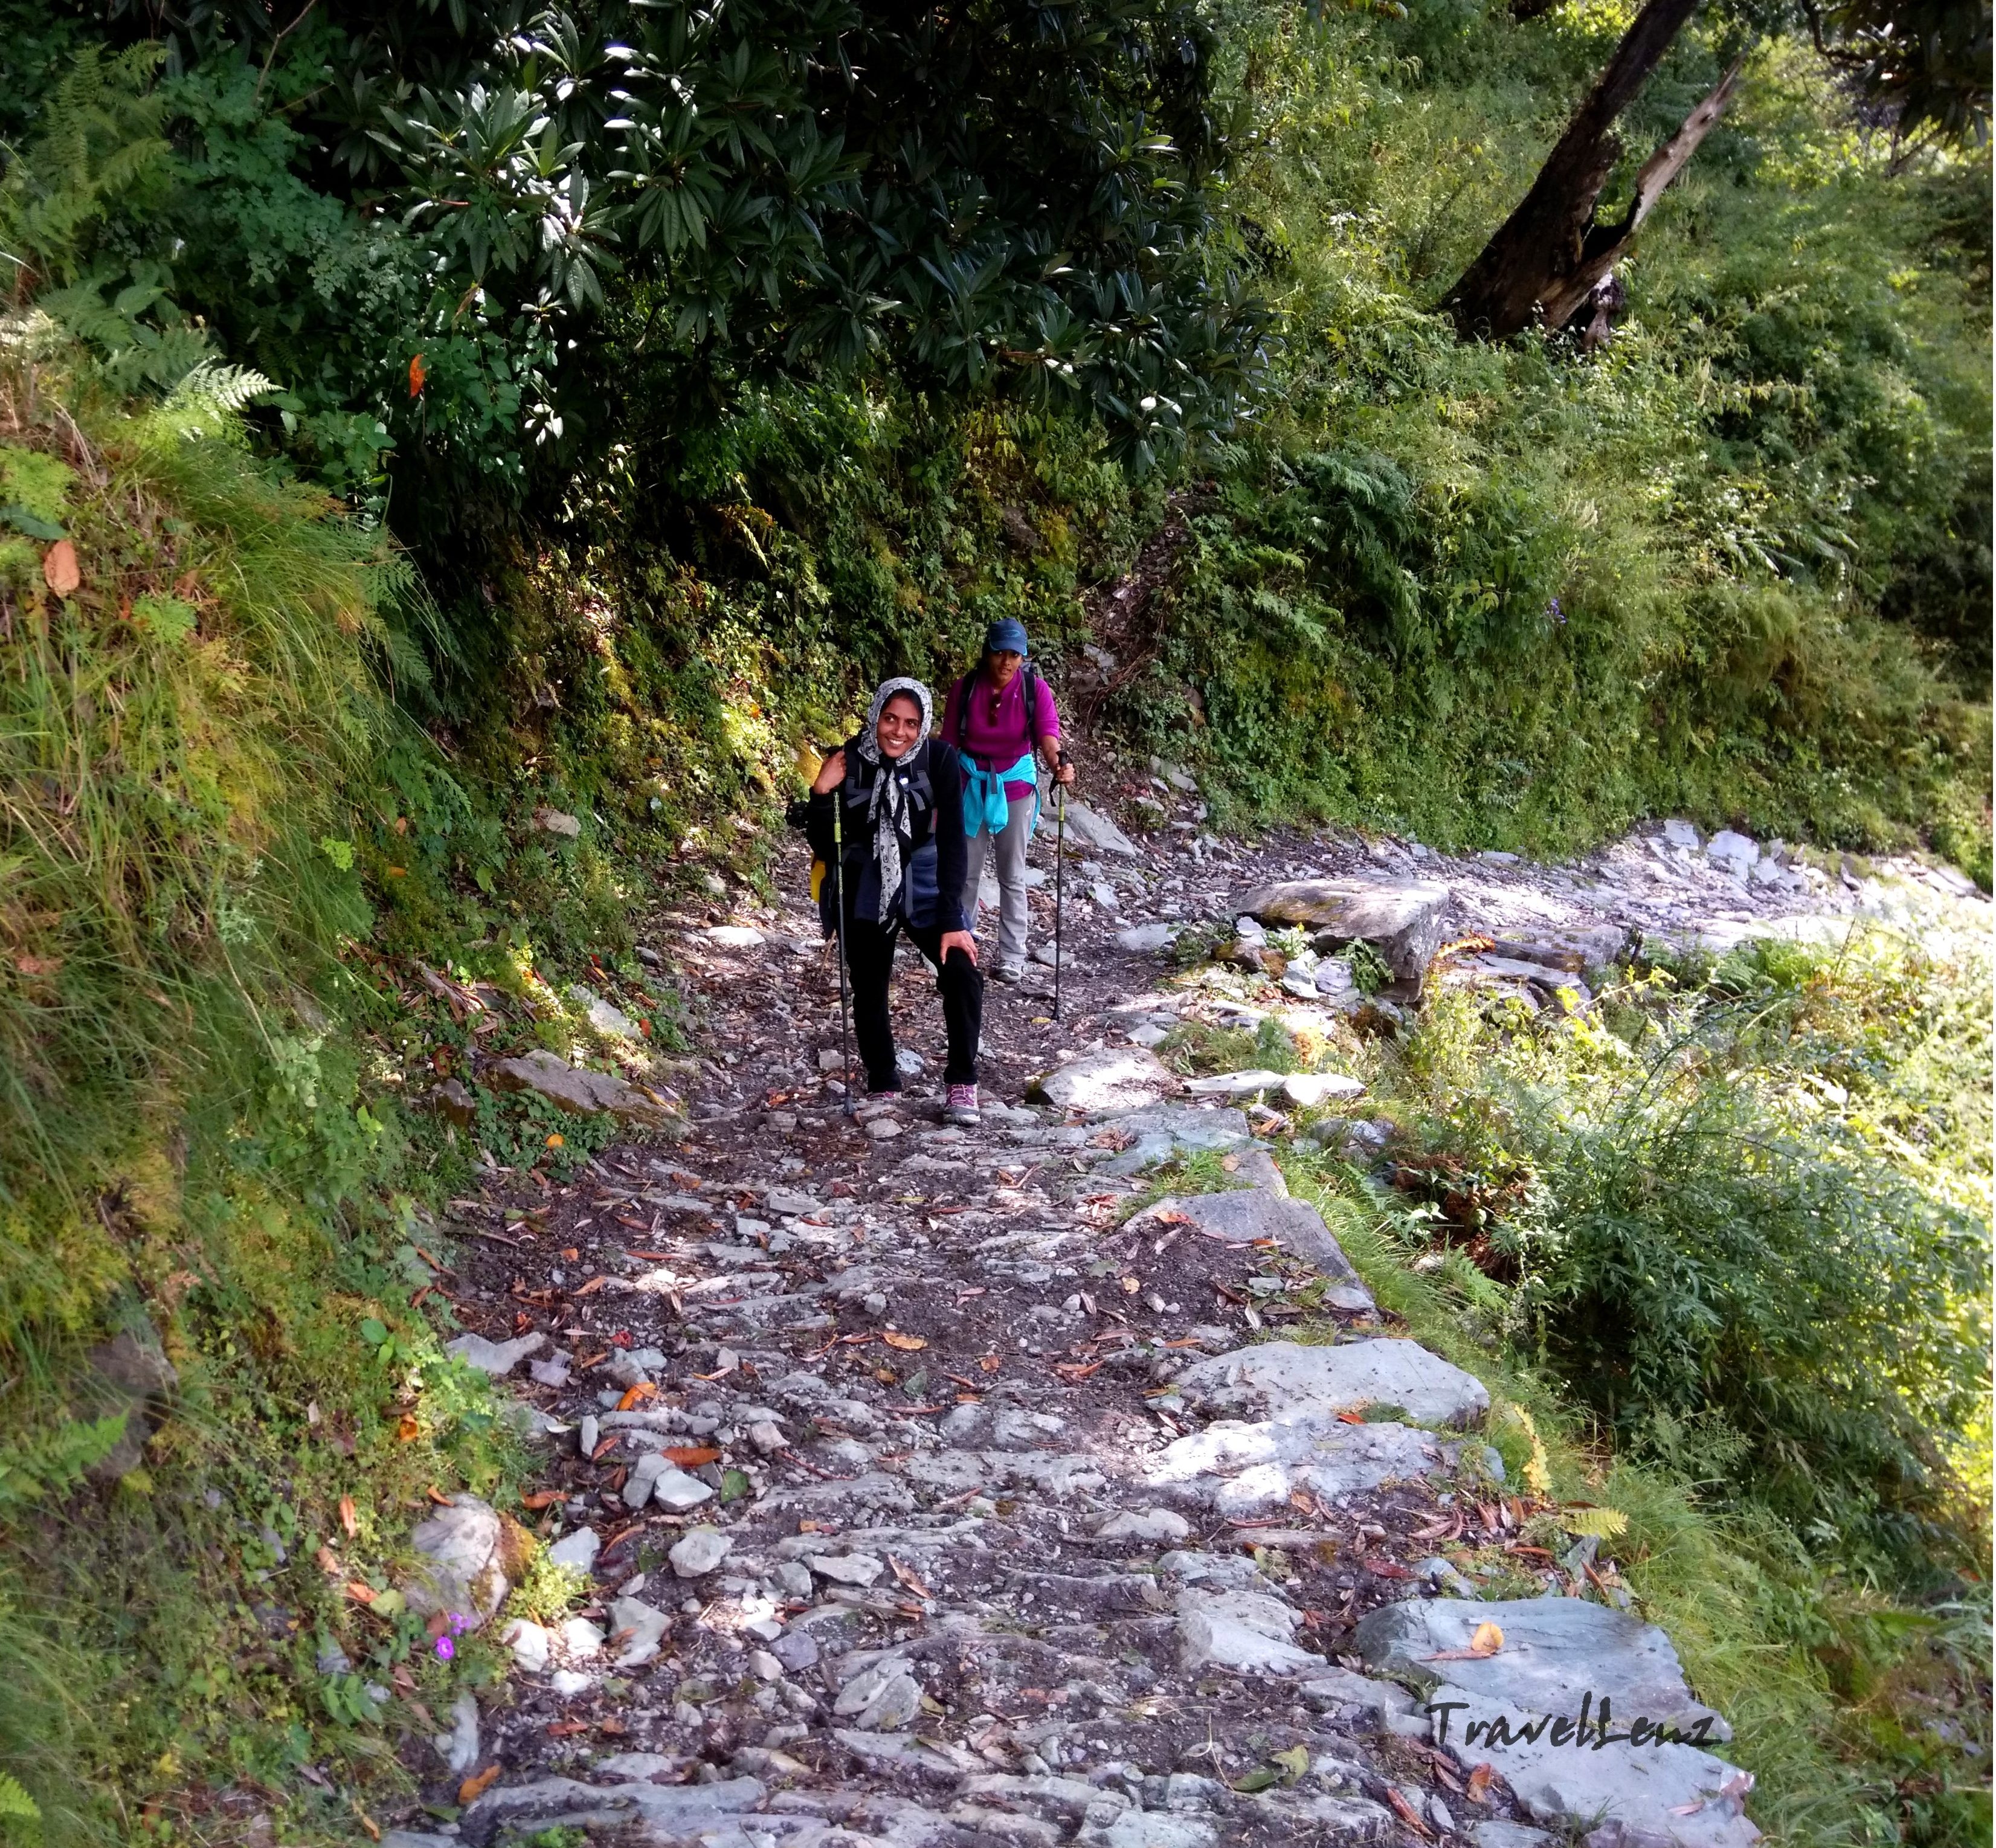 Trekkers climbing a steep path in a forest